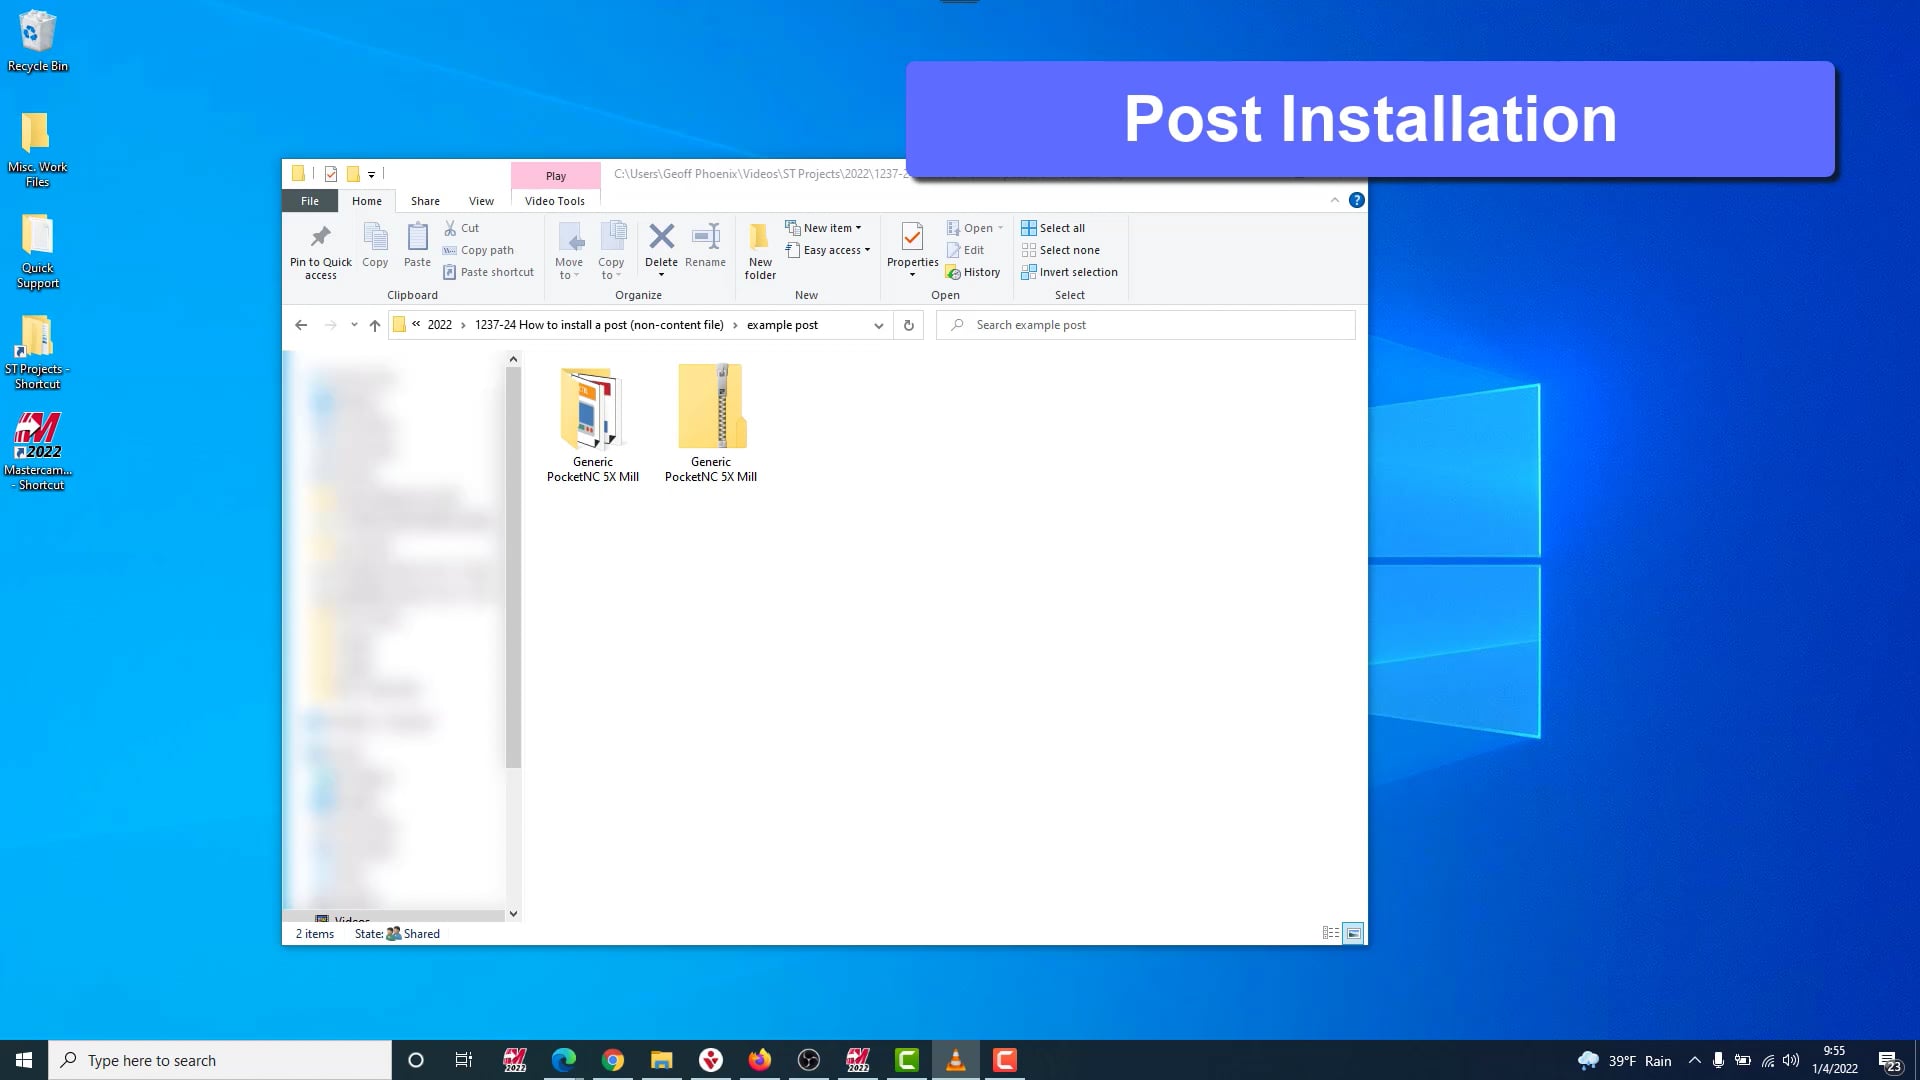 How to install a post (non-content file)